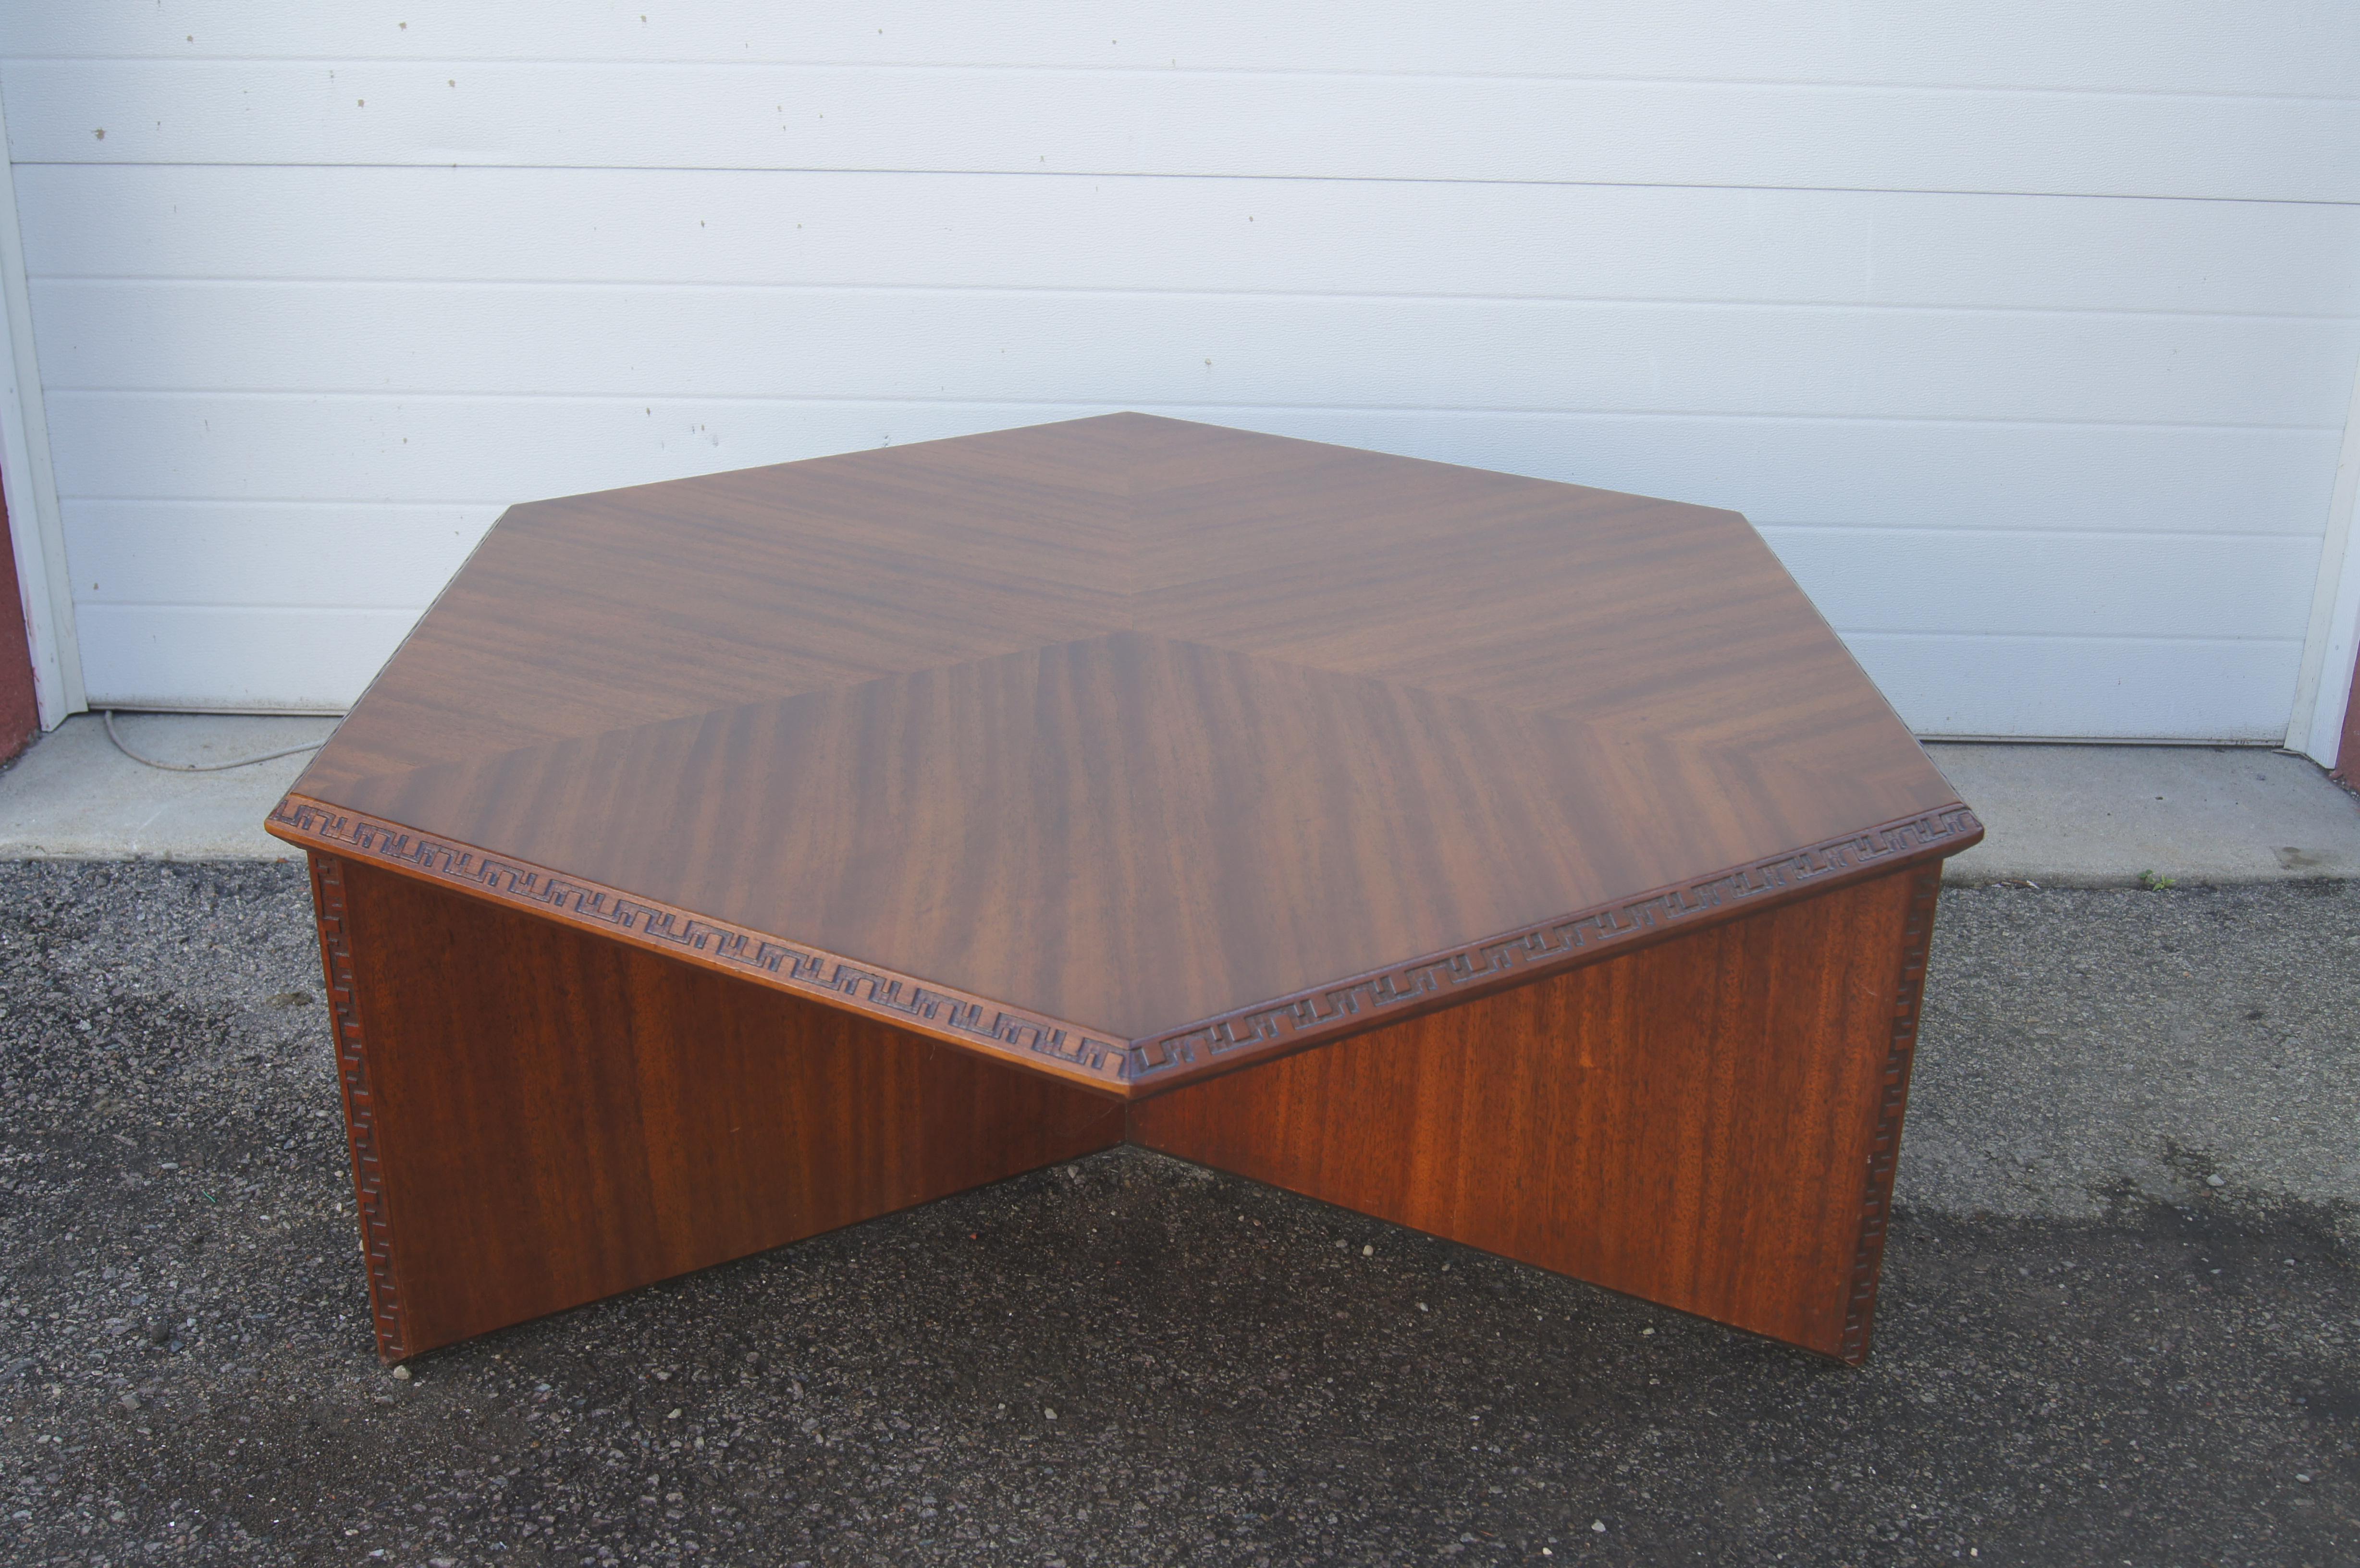 Part of the Taliesin collection that Frank Lloyd Wright designed for Henredon in 1955, this mahogany coffee table features a hexagonal top on a tripod base edged at the top with a dentil design from Taliesin. 

The designer's signature stamp is